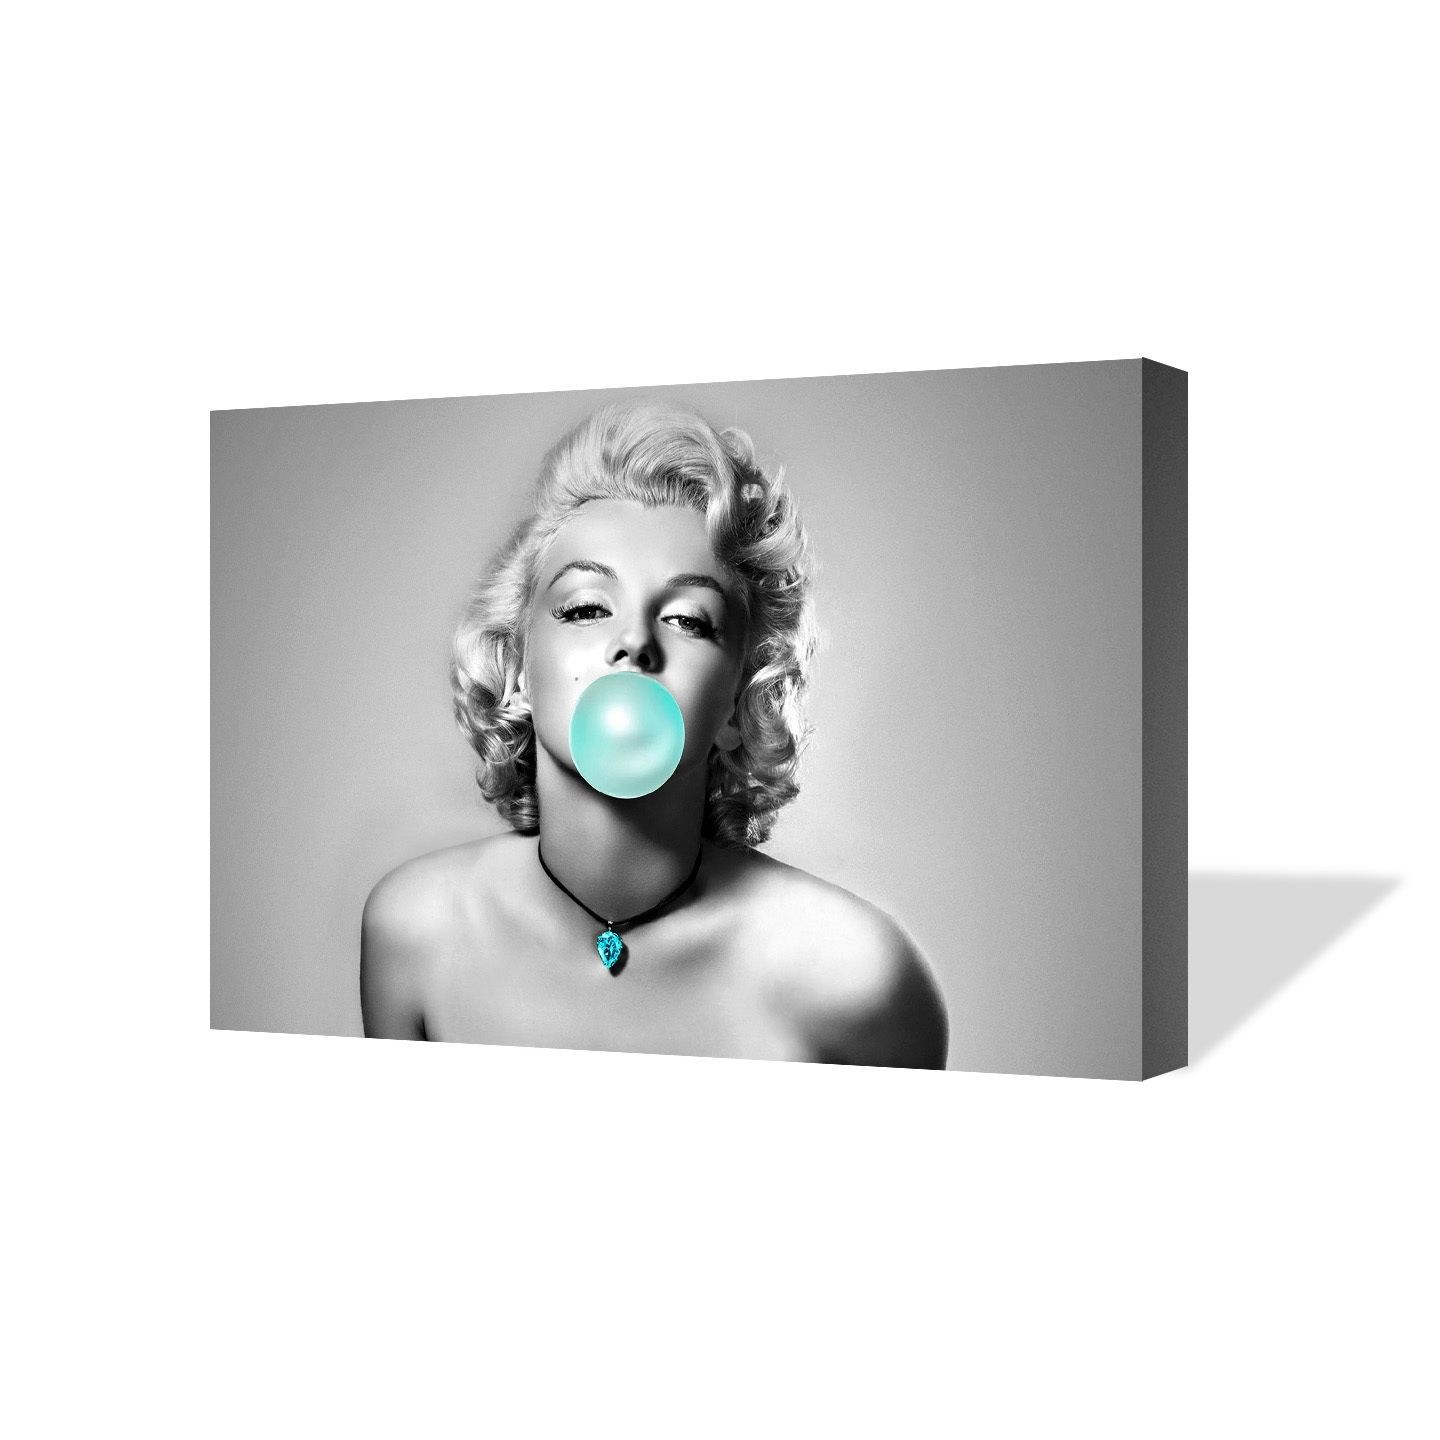 Ebay Inside Widely Used Marilyn Monroe Black And White Wall Art (View 8 of 15)